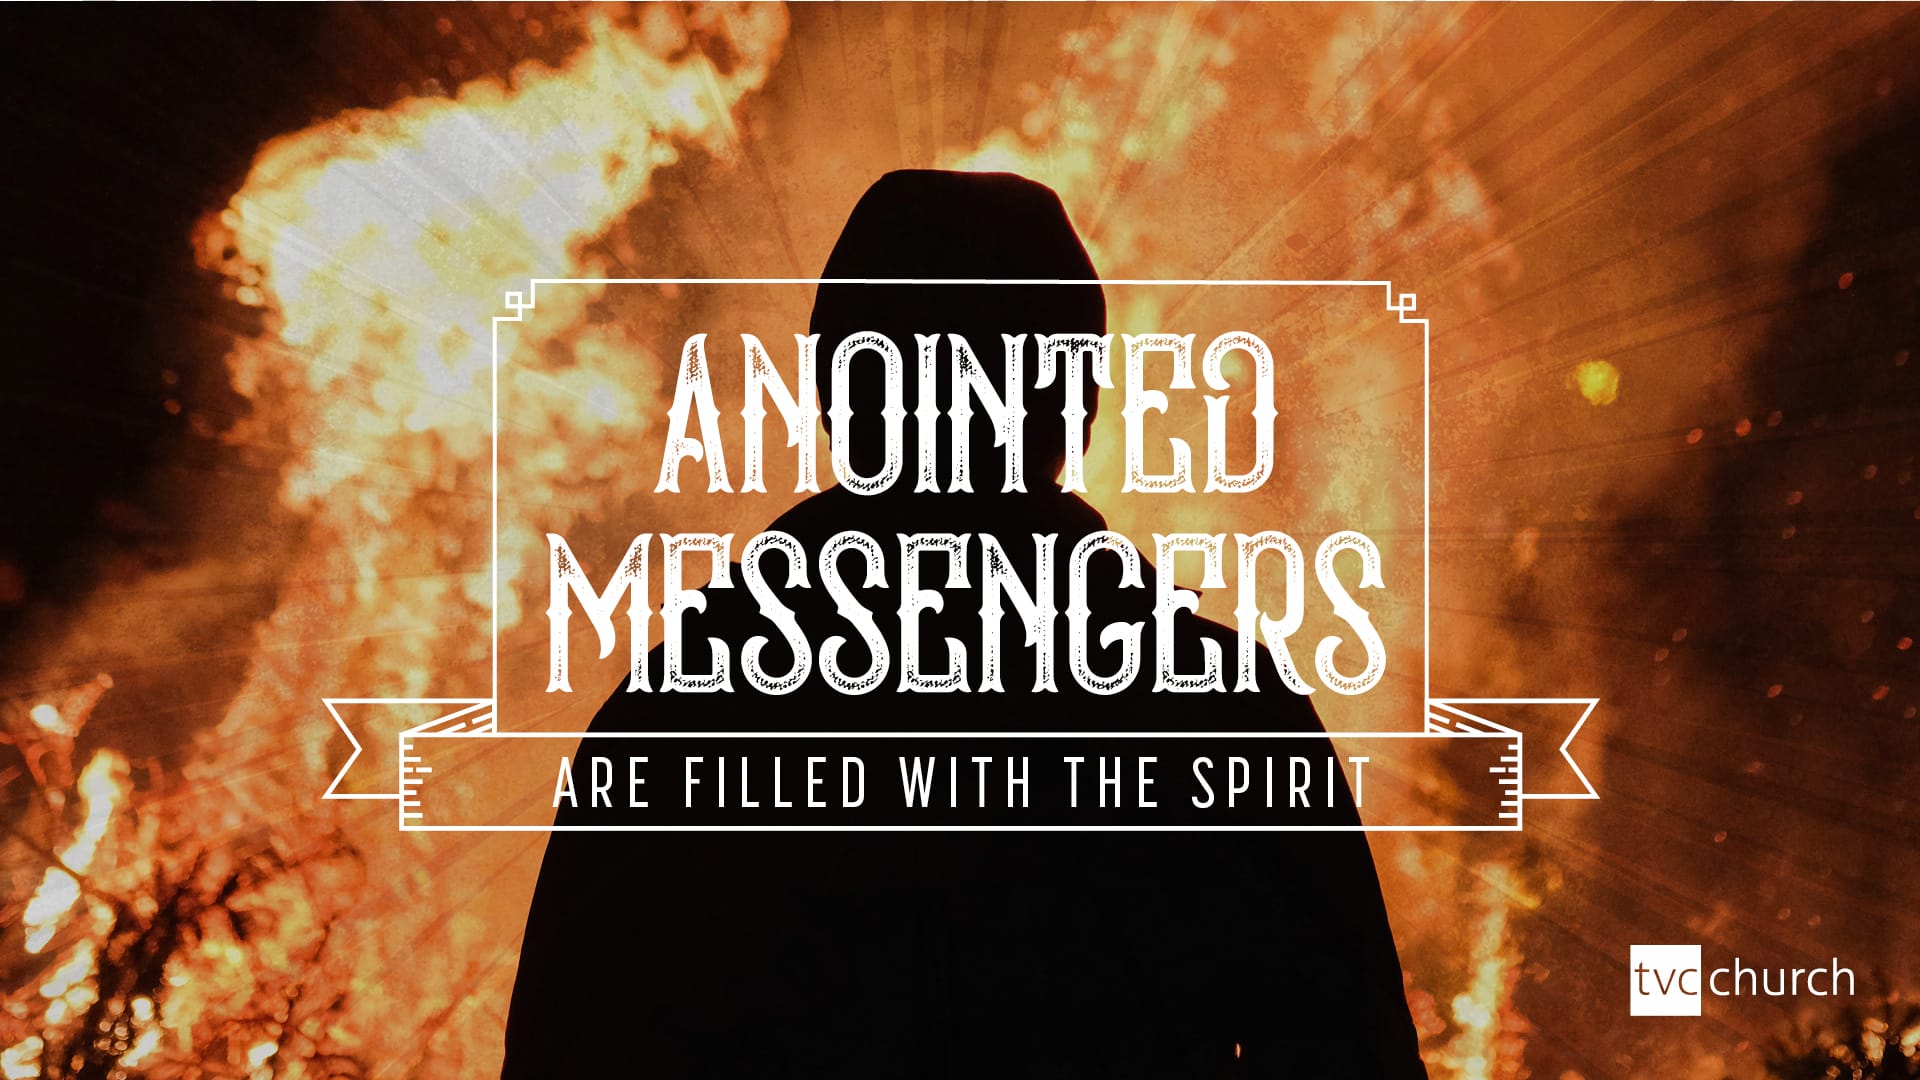 Anointed Messengers…are filled with the Spirit